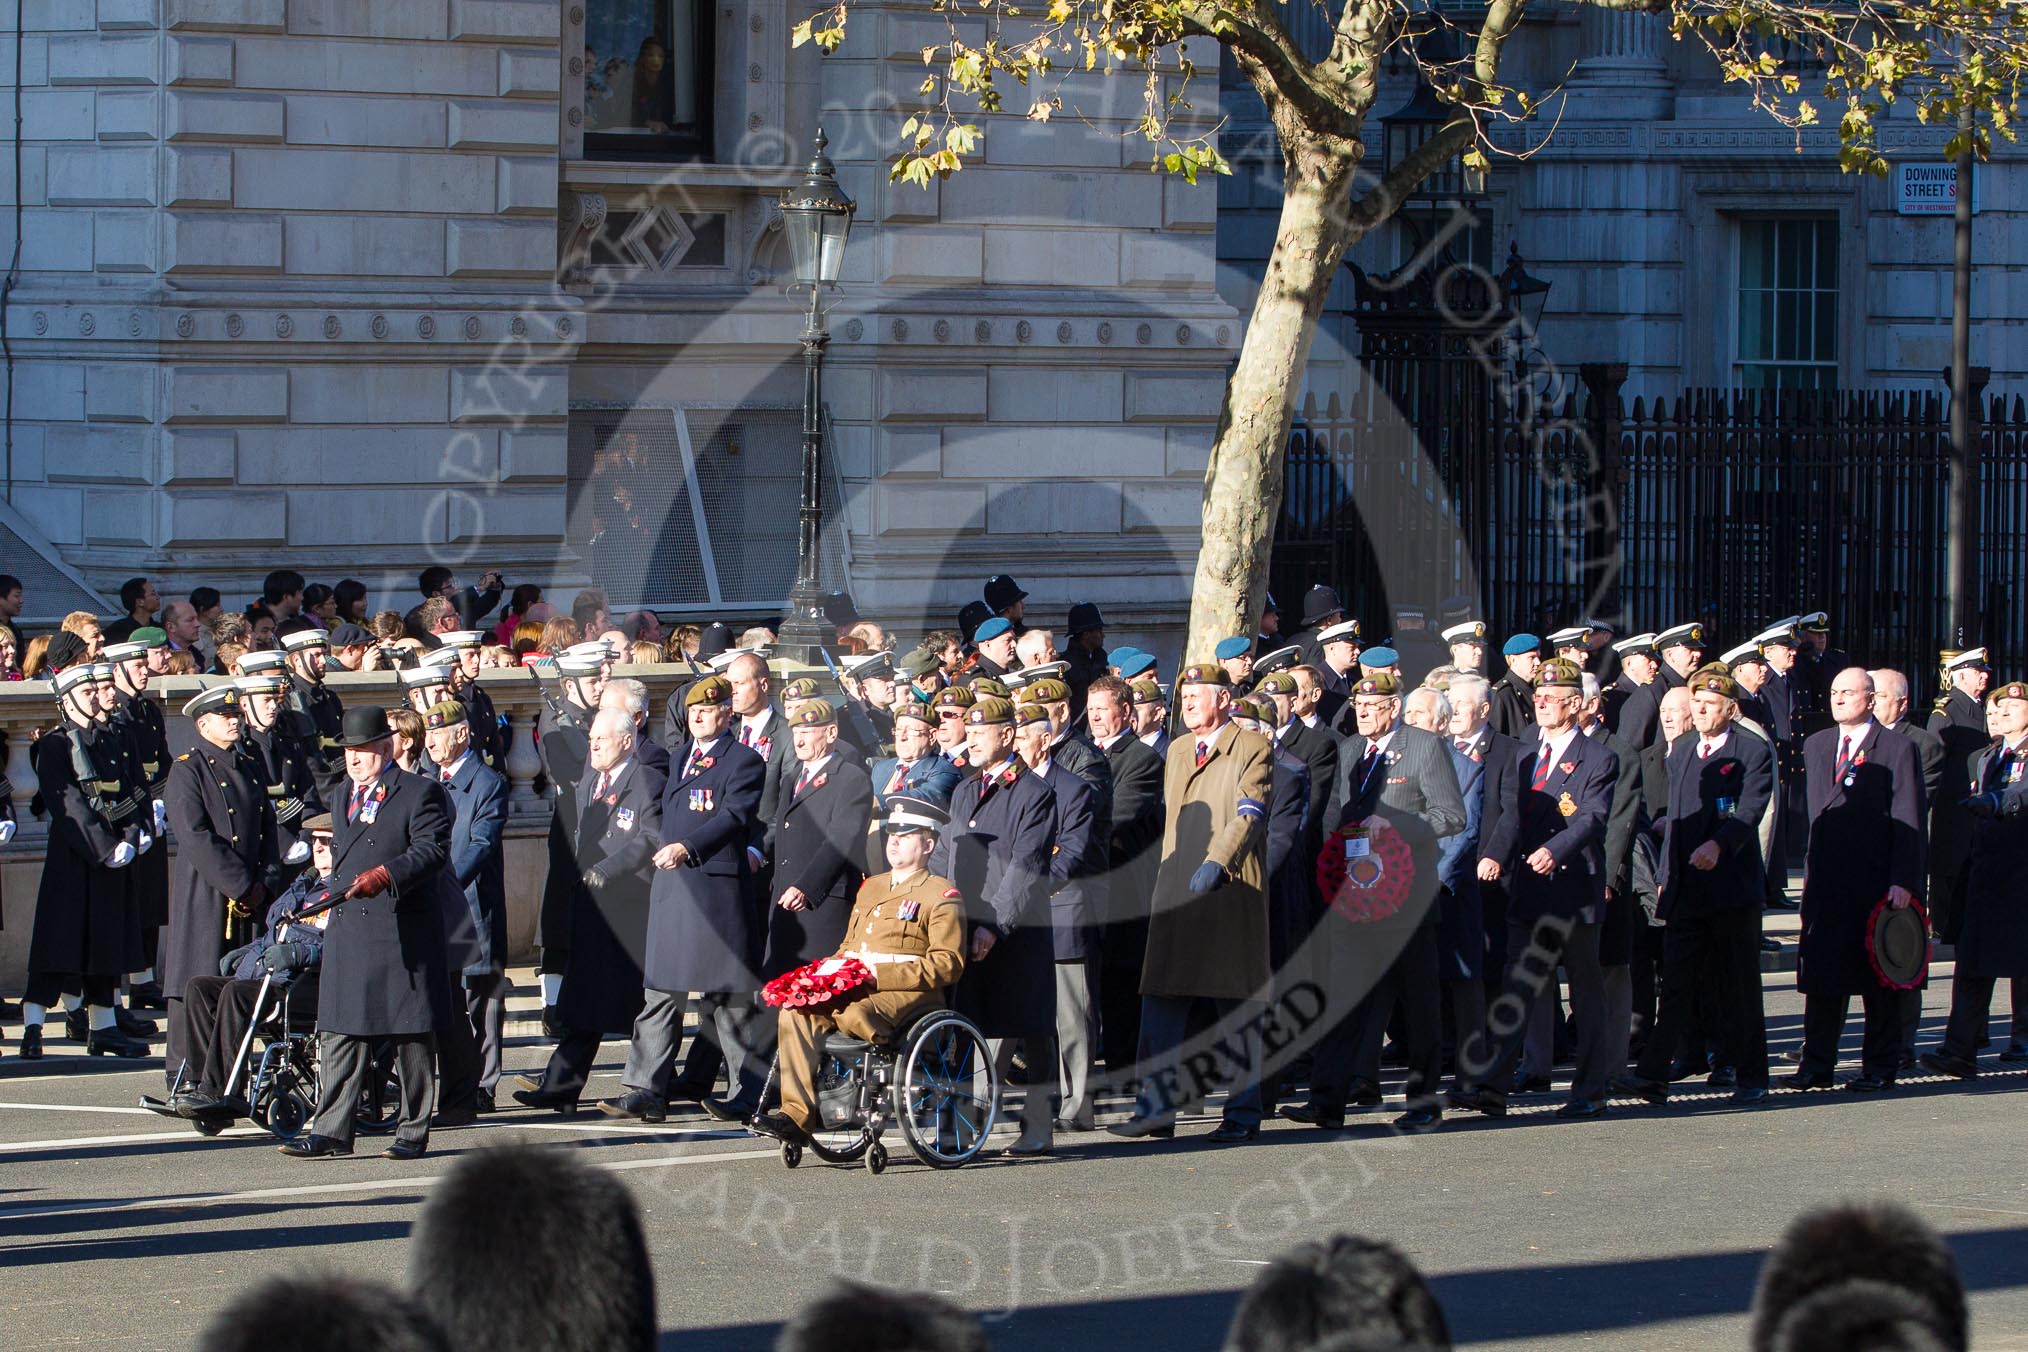 Remembrance Sunday 2012 Cenotaph March Past: Group A25 - Argyll & Sutherland Highlanders Regimental Association and A26 - Grenadier Guards Association..
Whitehall, Cenotaph,
London SW1,

United Kingdom,
on 11 November 2012 at 11:52, image #739